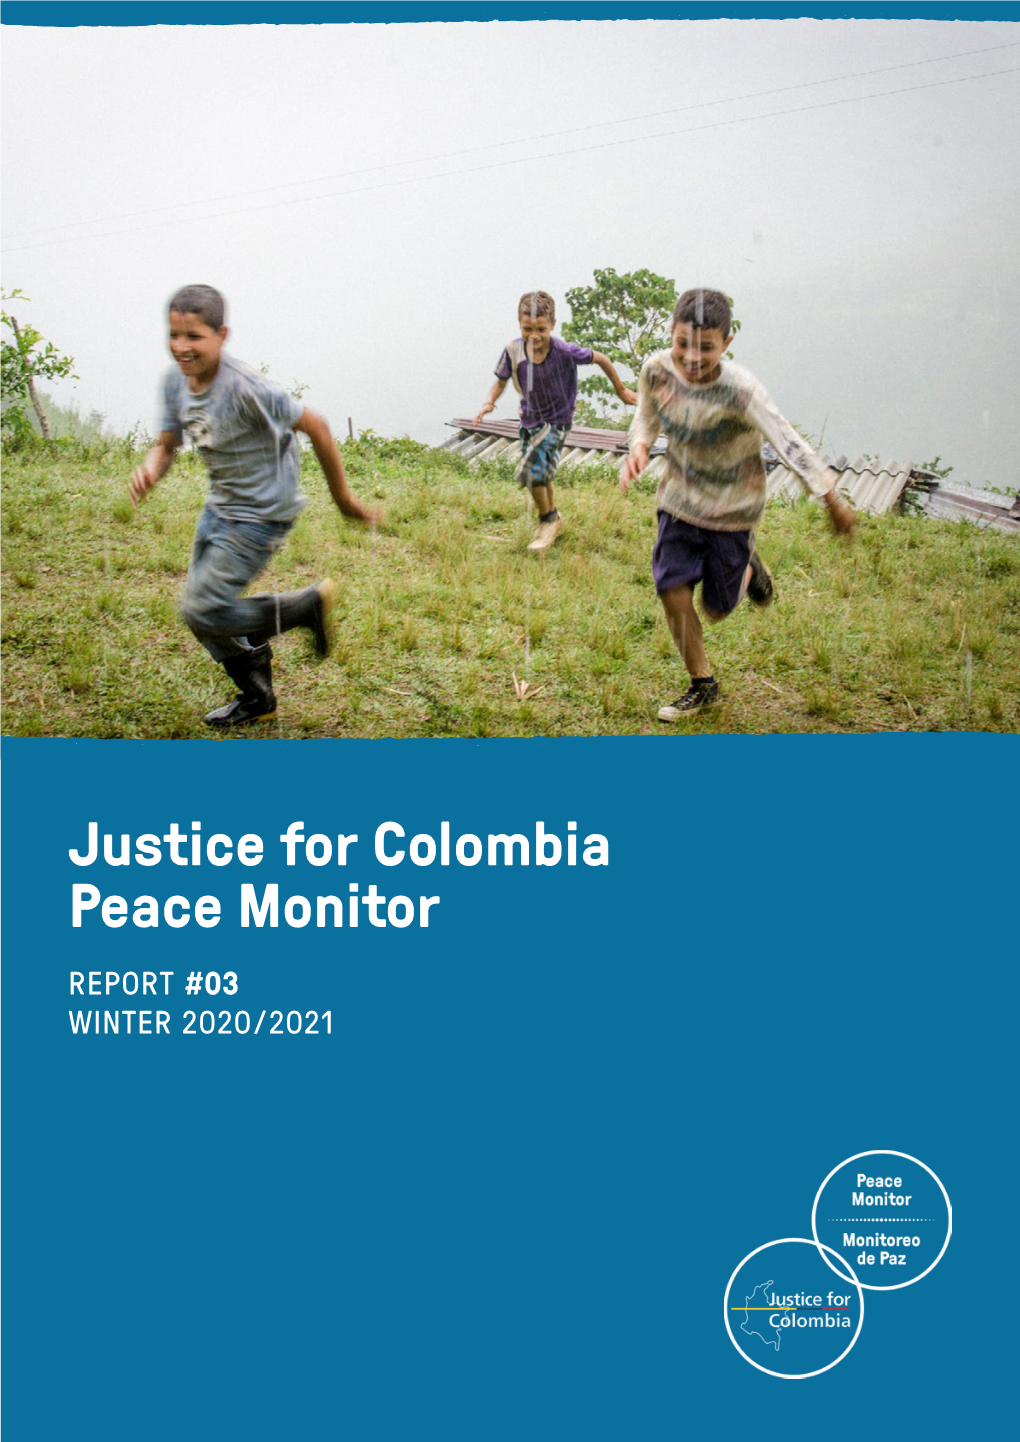 Justice for Colombia Peace Monitor REPORT #03 WINTER 2020/2021